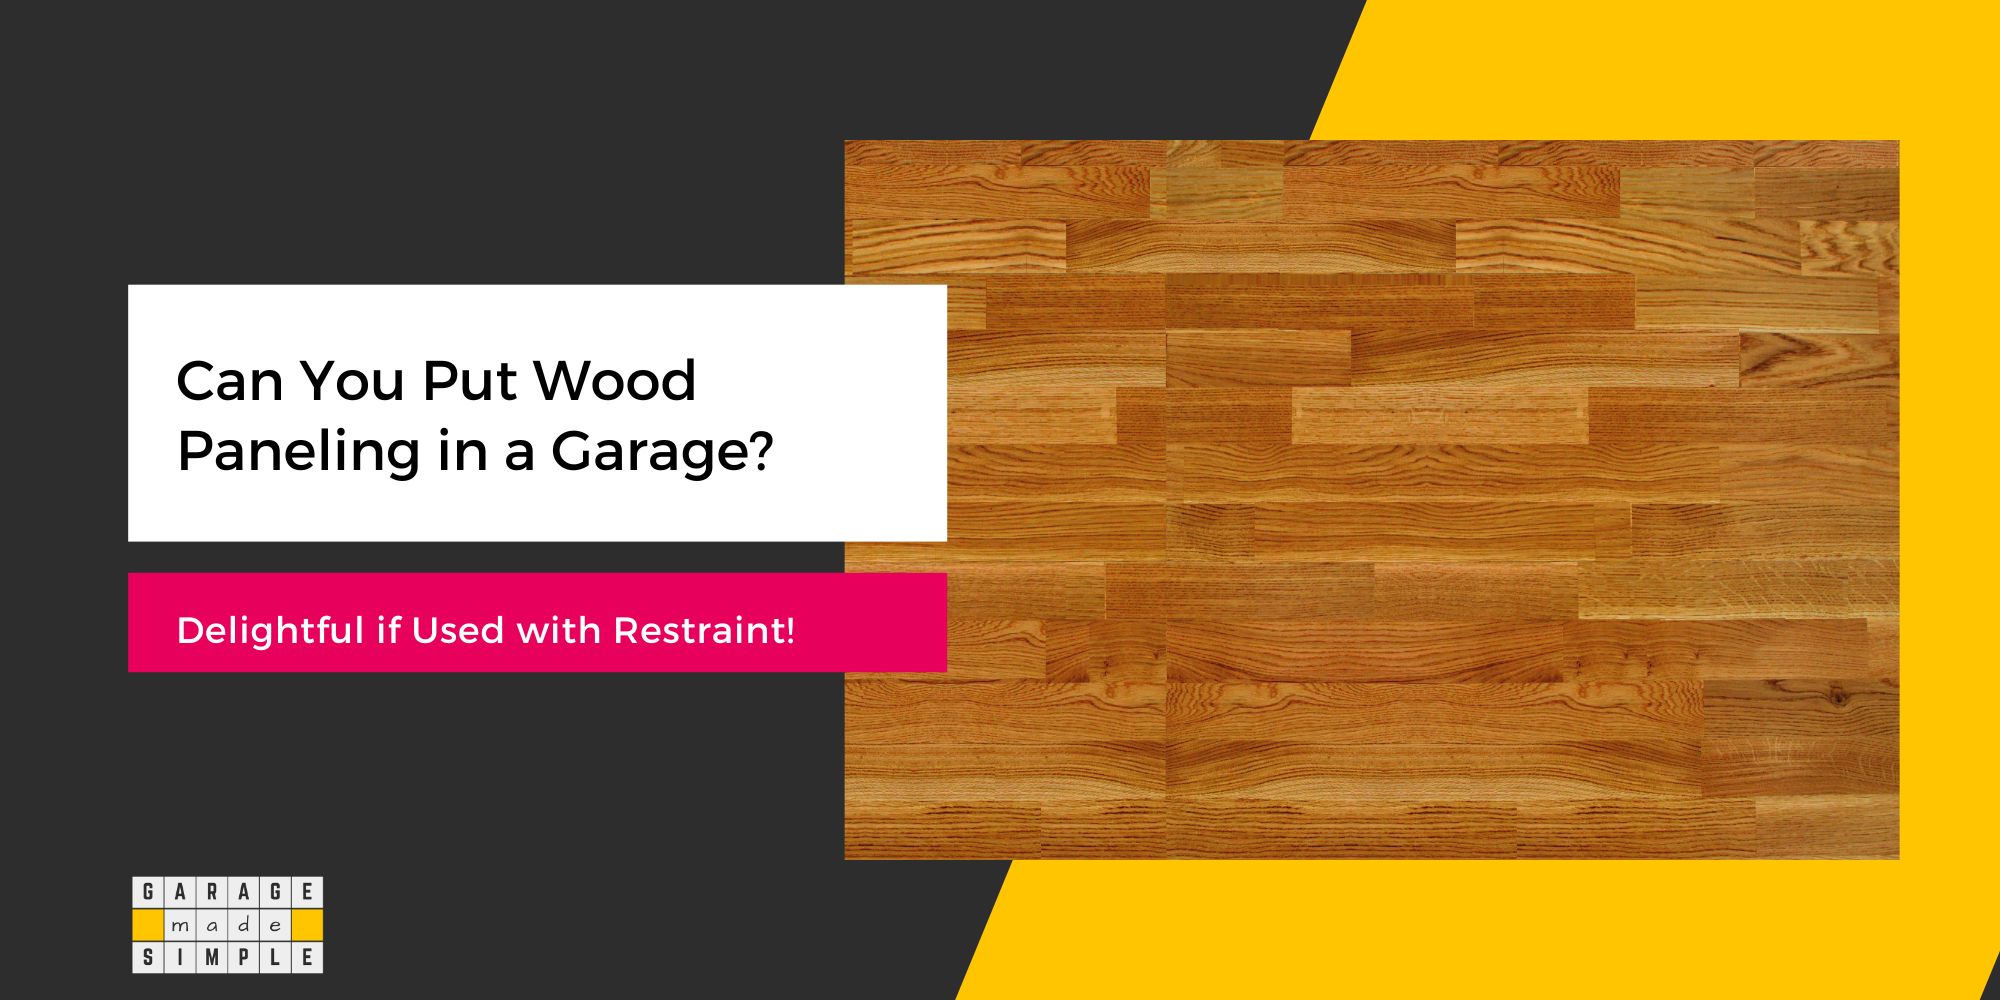 Wood Paneling in a Garage Can be Visually Stunning